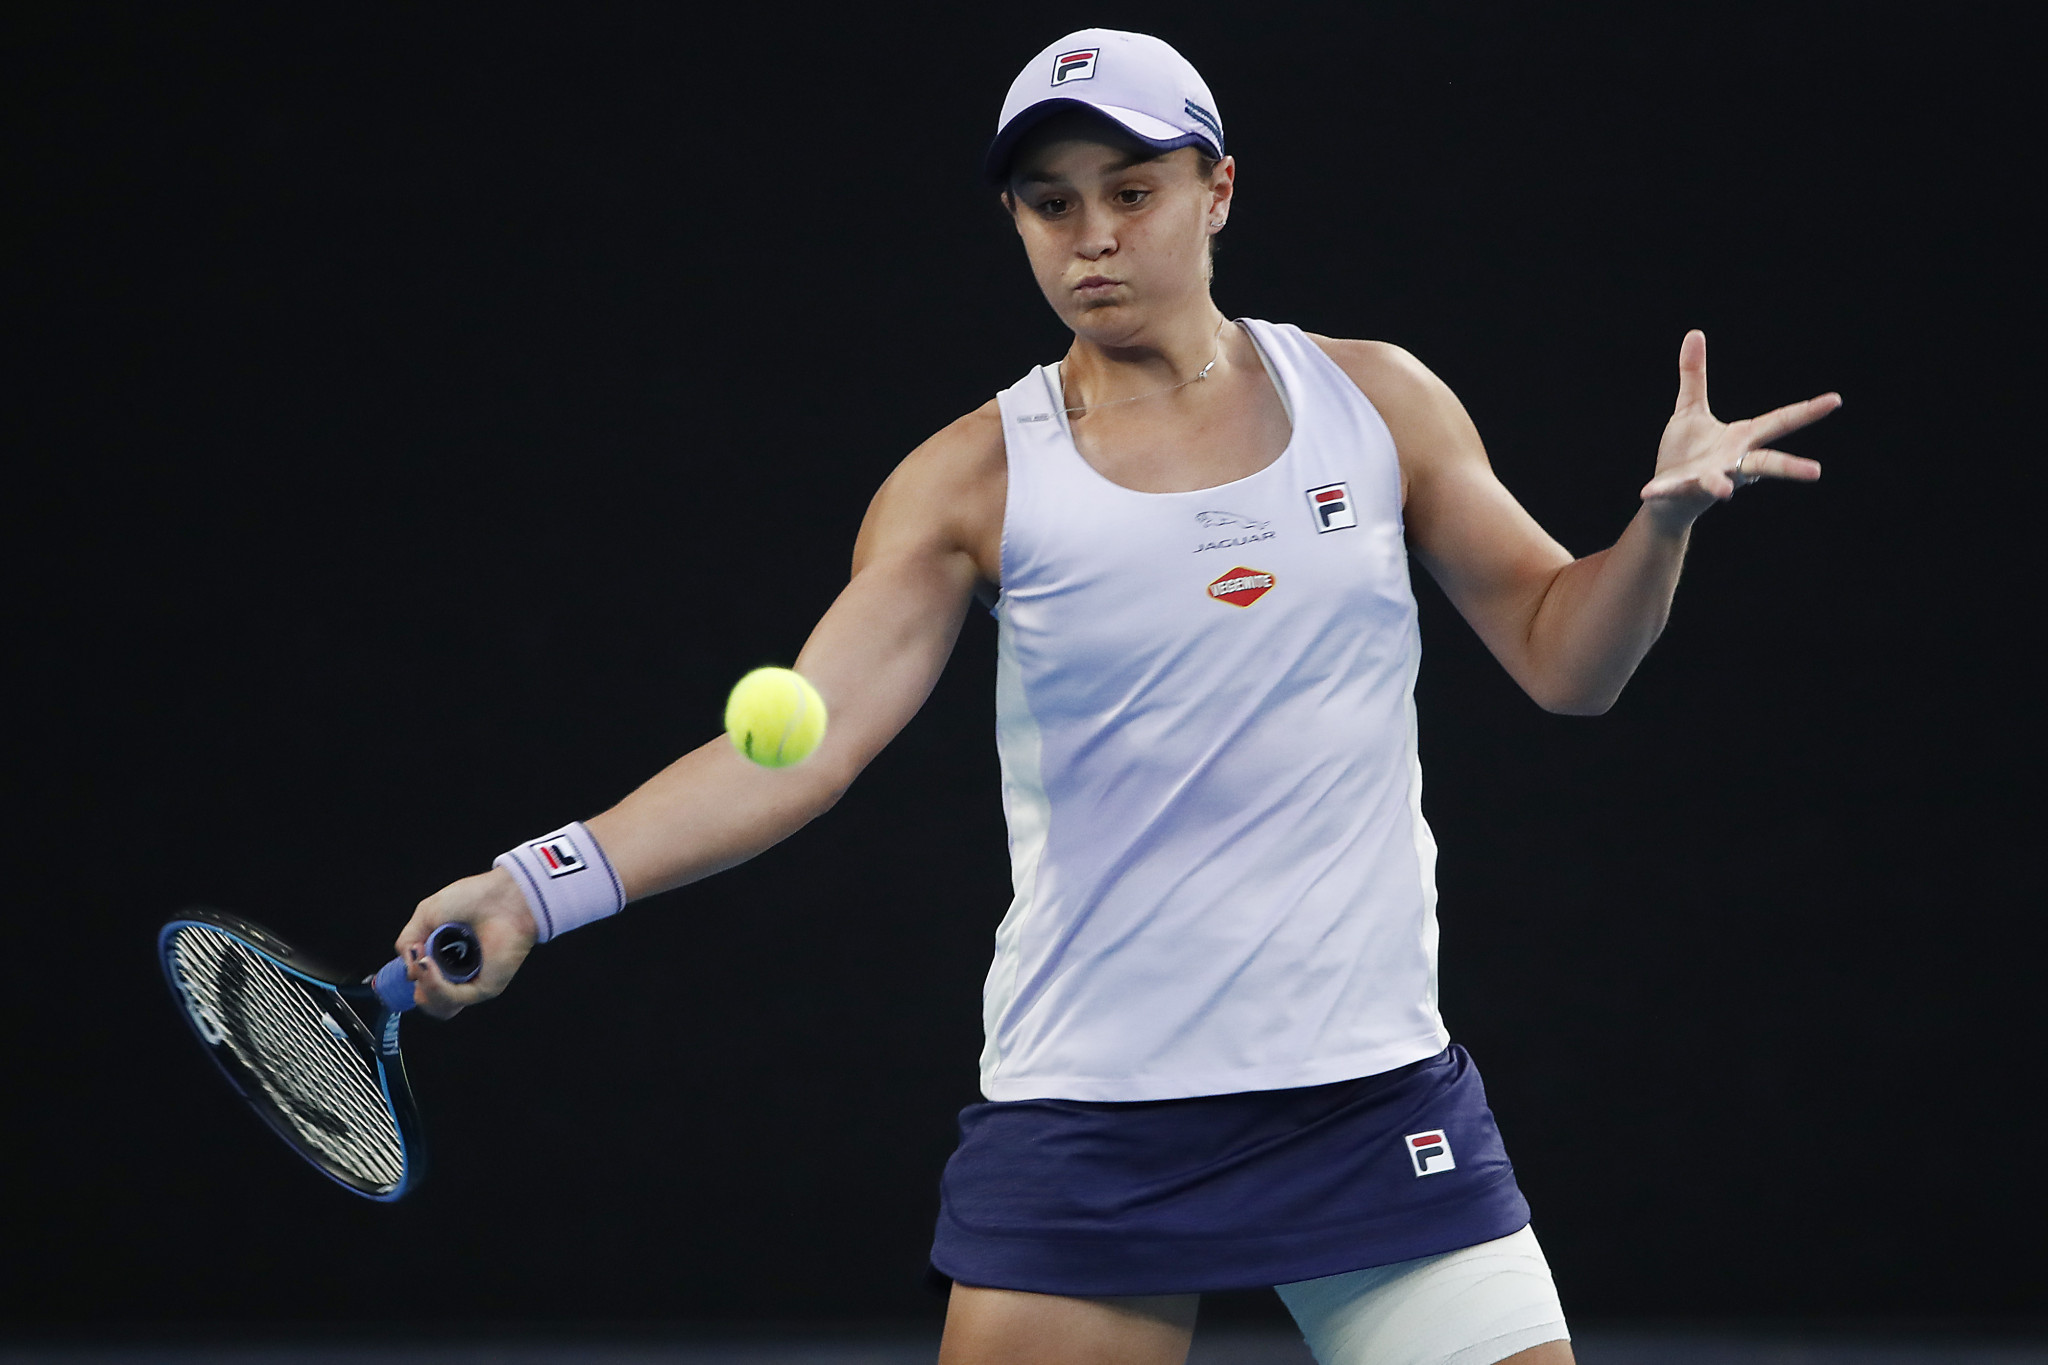 Ashleigh Barty reached the quarter-finals of the Australian Open ©Getty Images